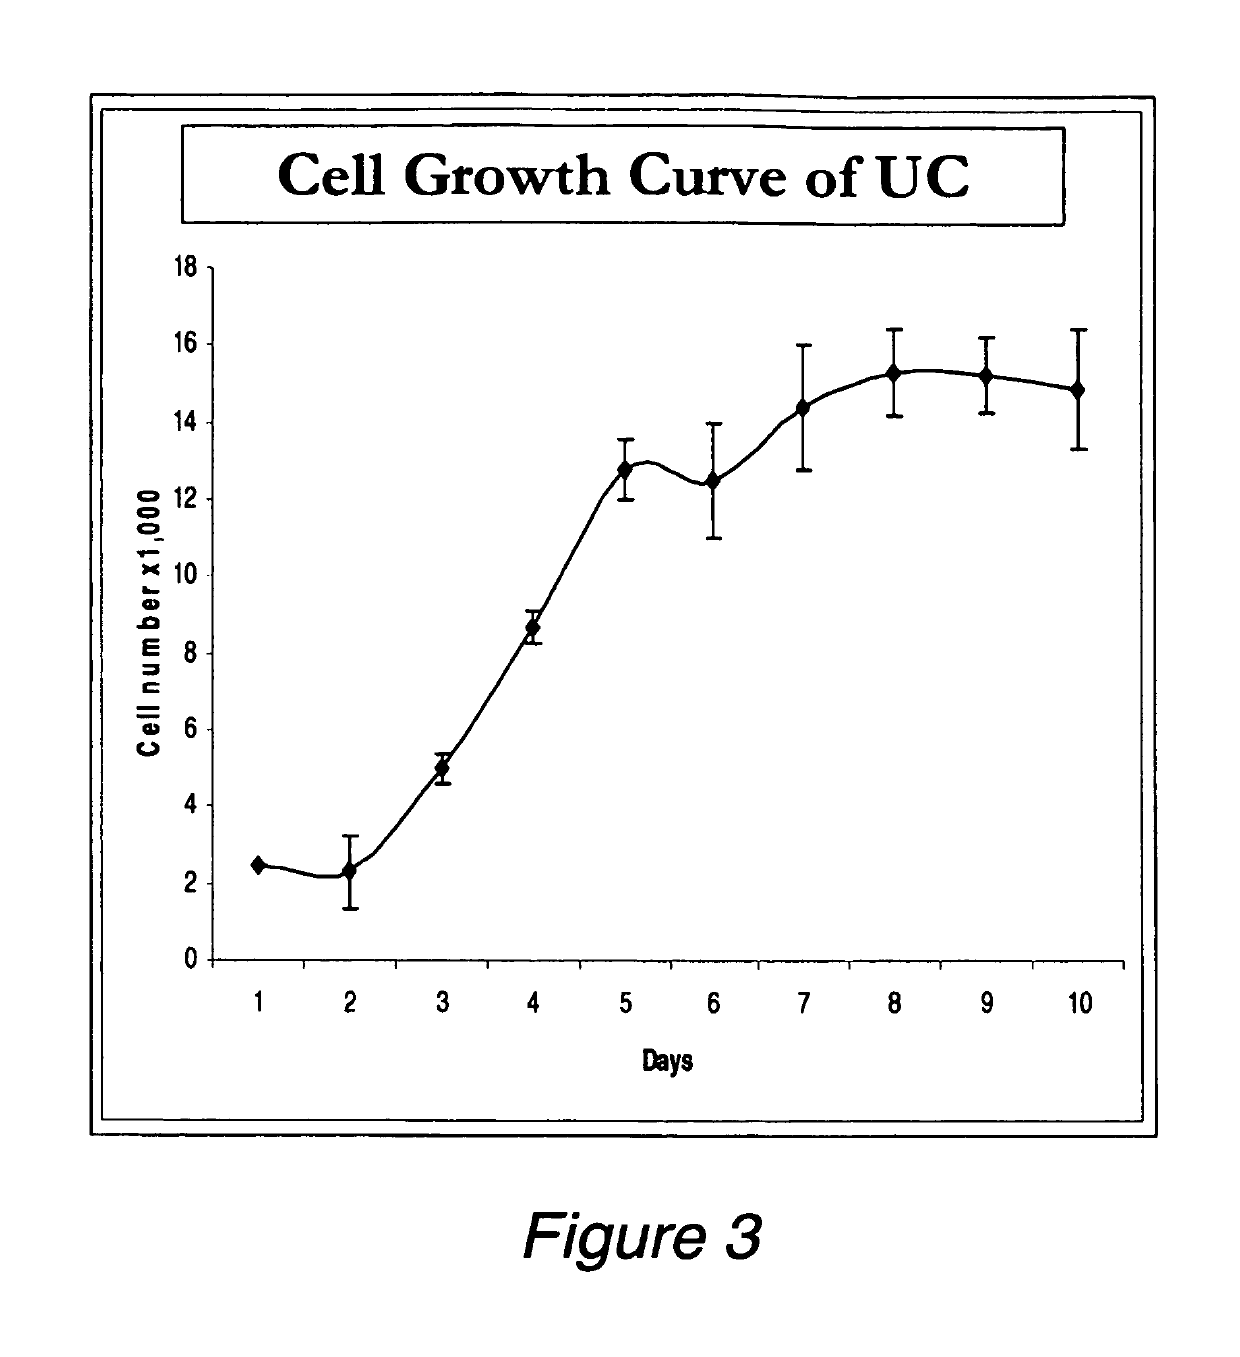 Progenitor cells from urine and methods for using the same